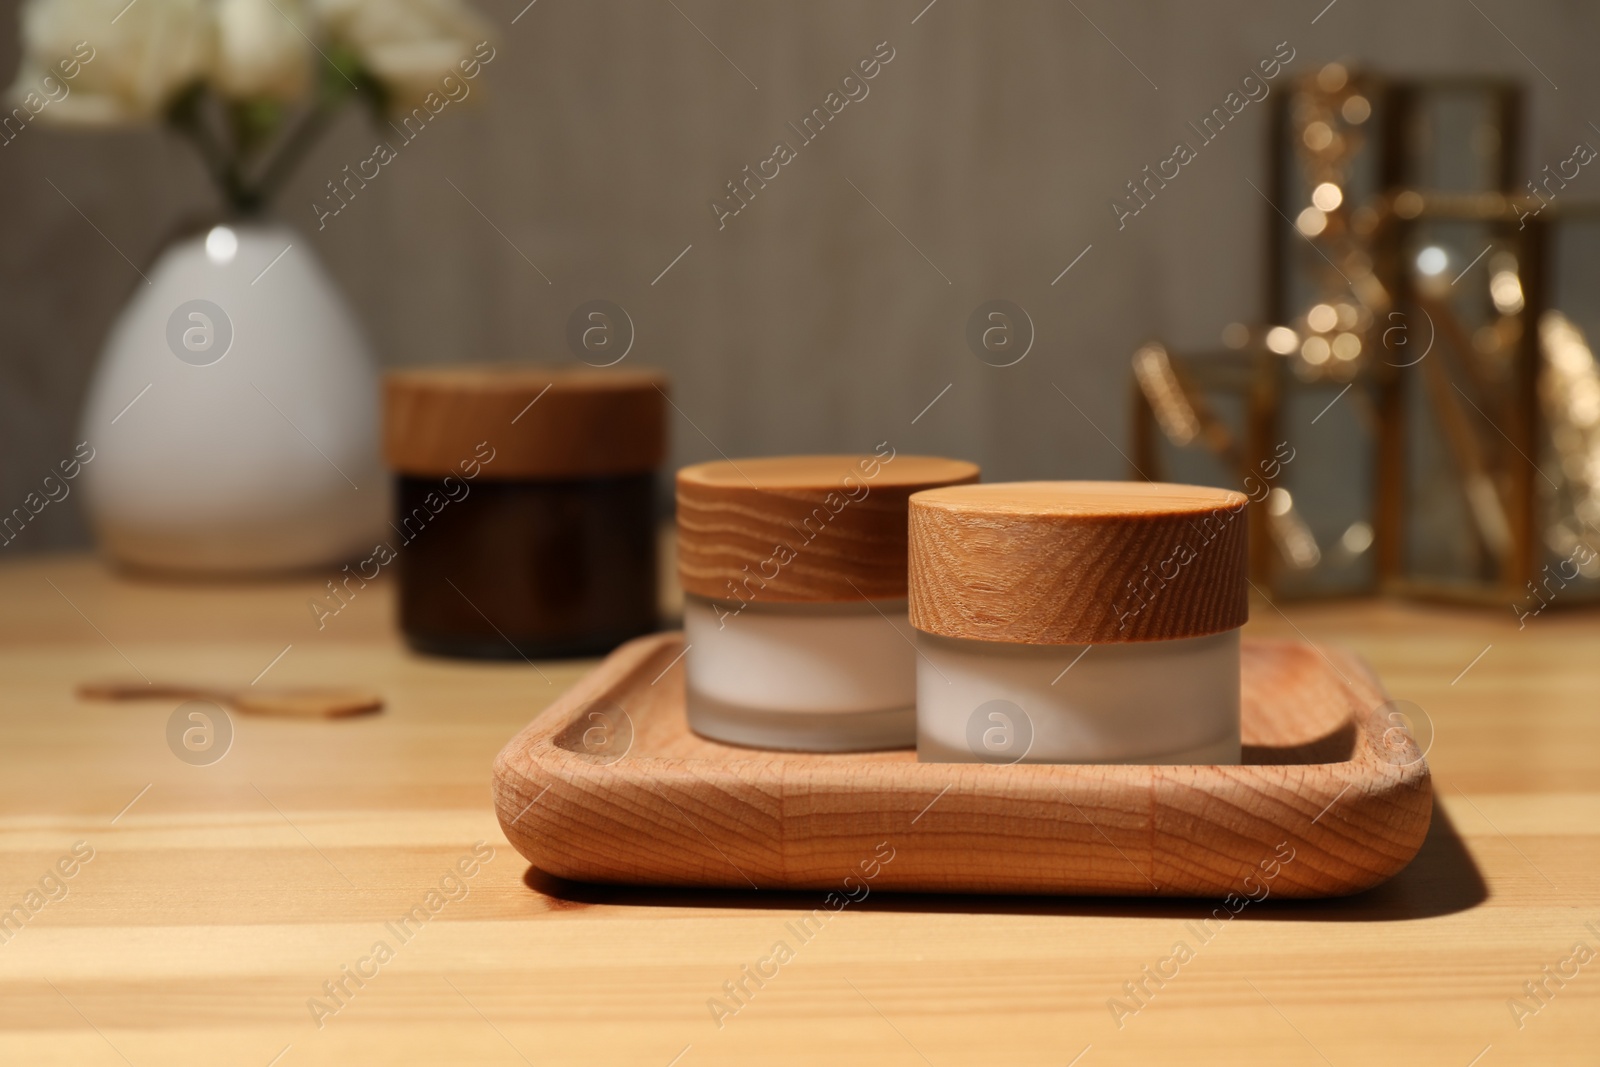 Photo of Jars of cream and tray on wooden table, space for text